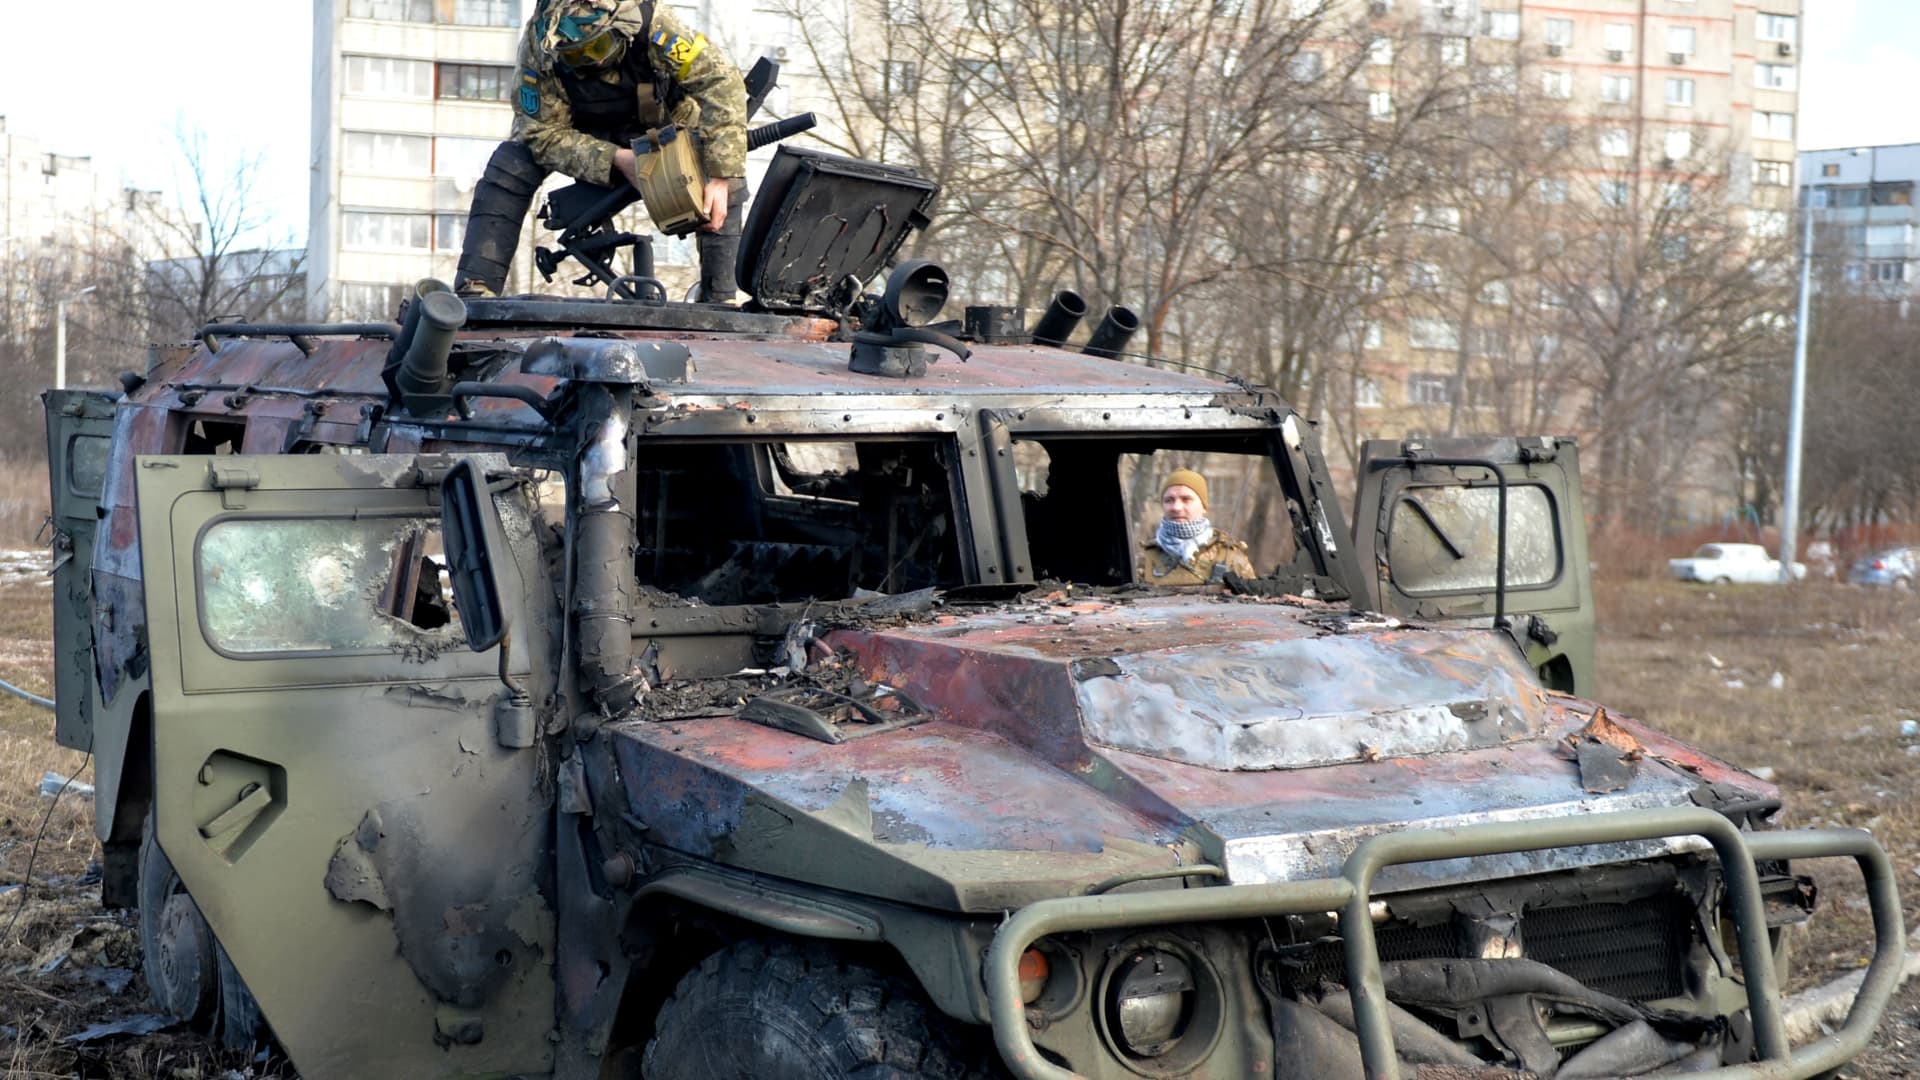 Ukrainian soldiers examine a destroyed Russian infantry vehicle on February 27, 2022.